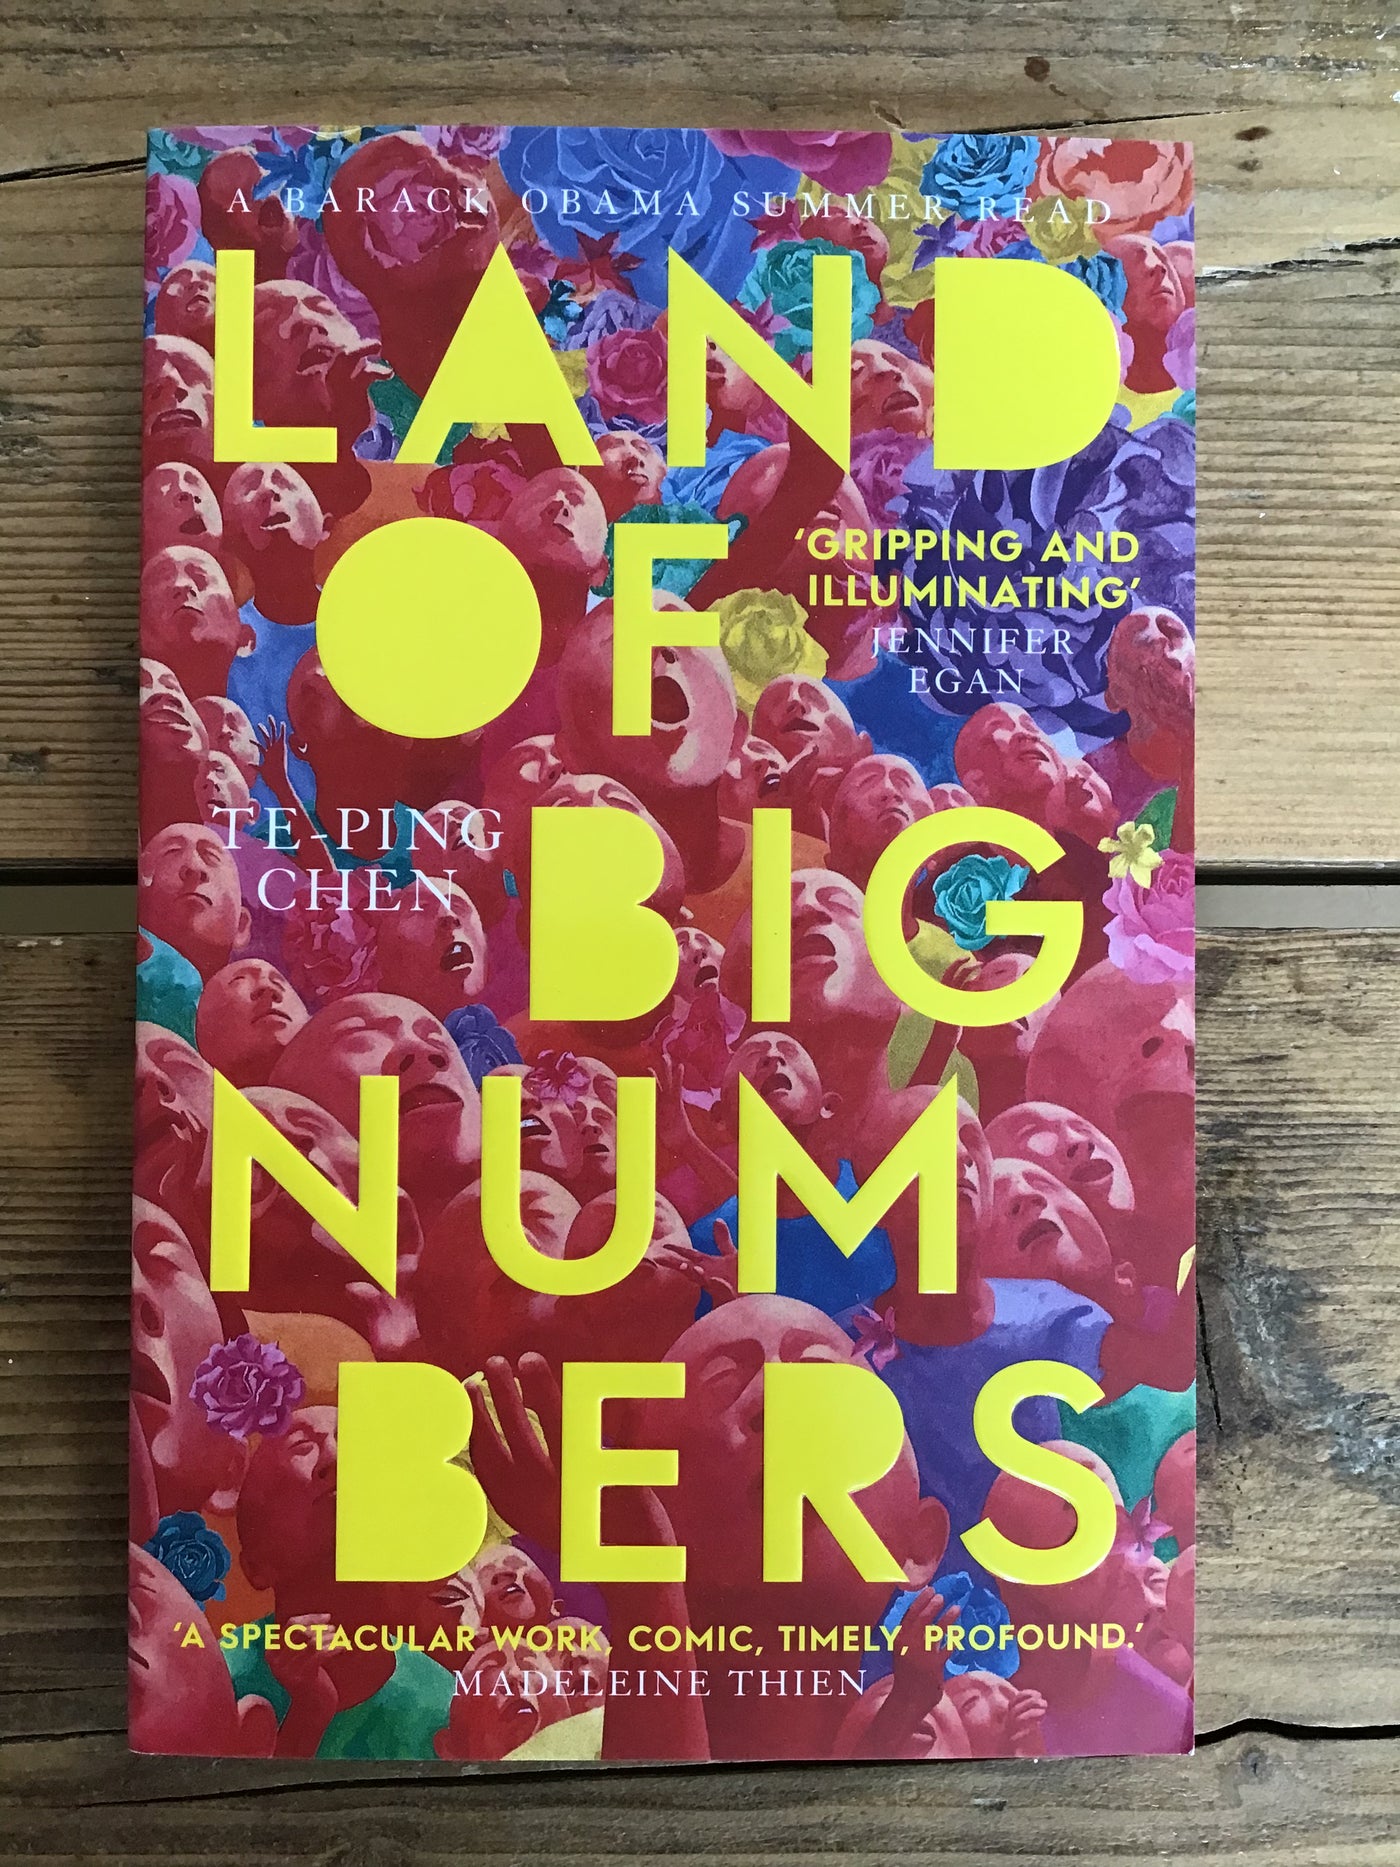 Land of Big Numbers